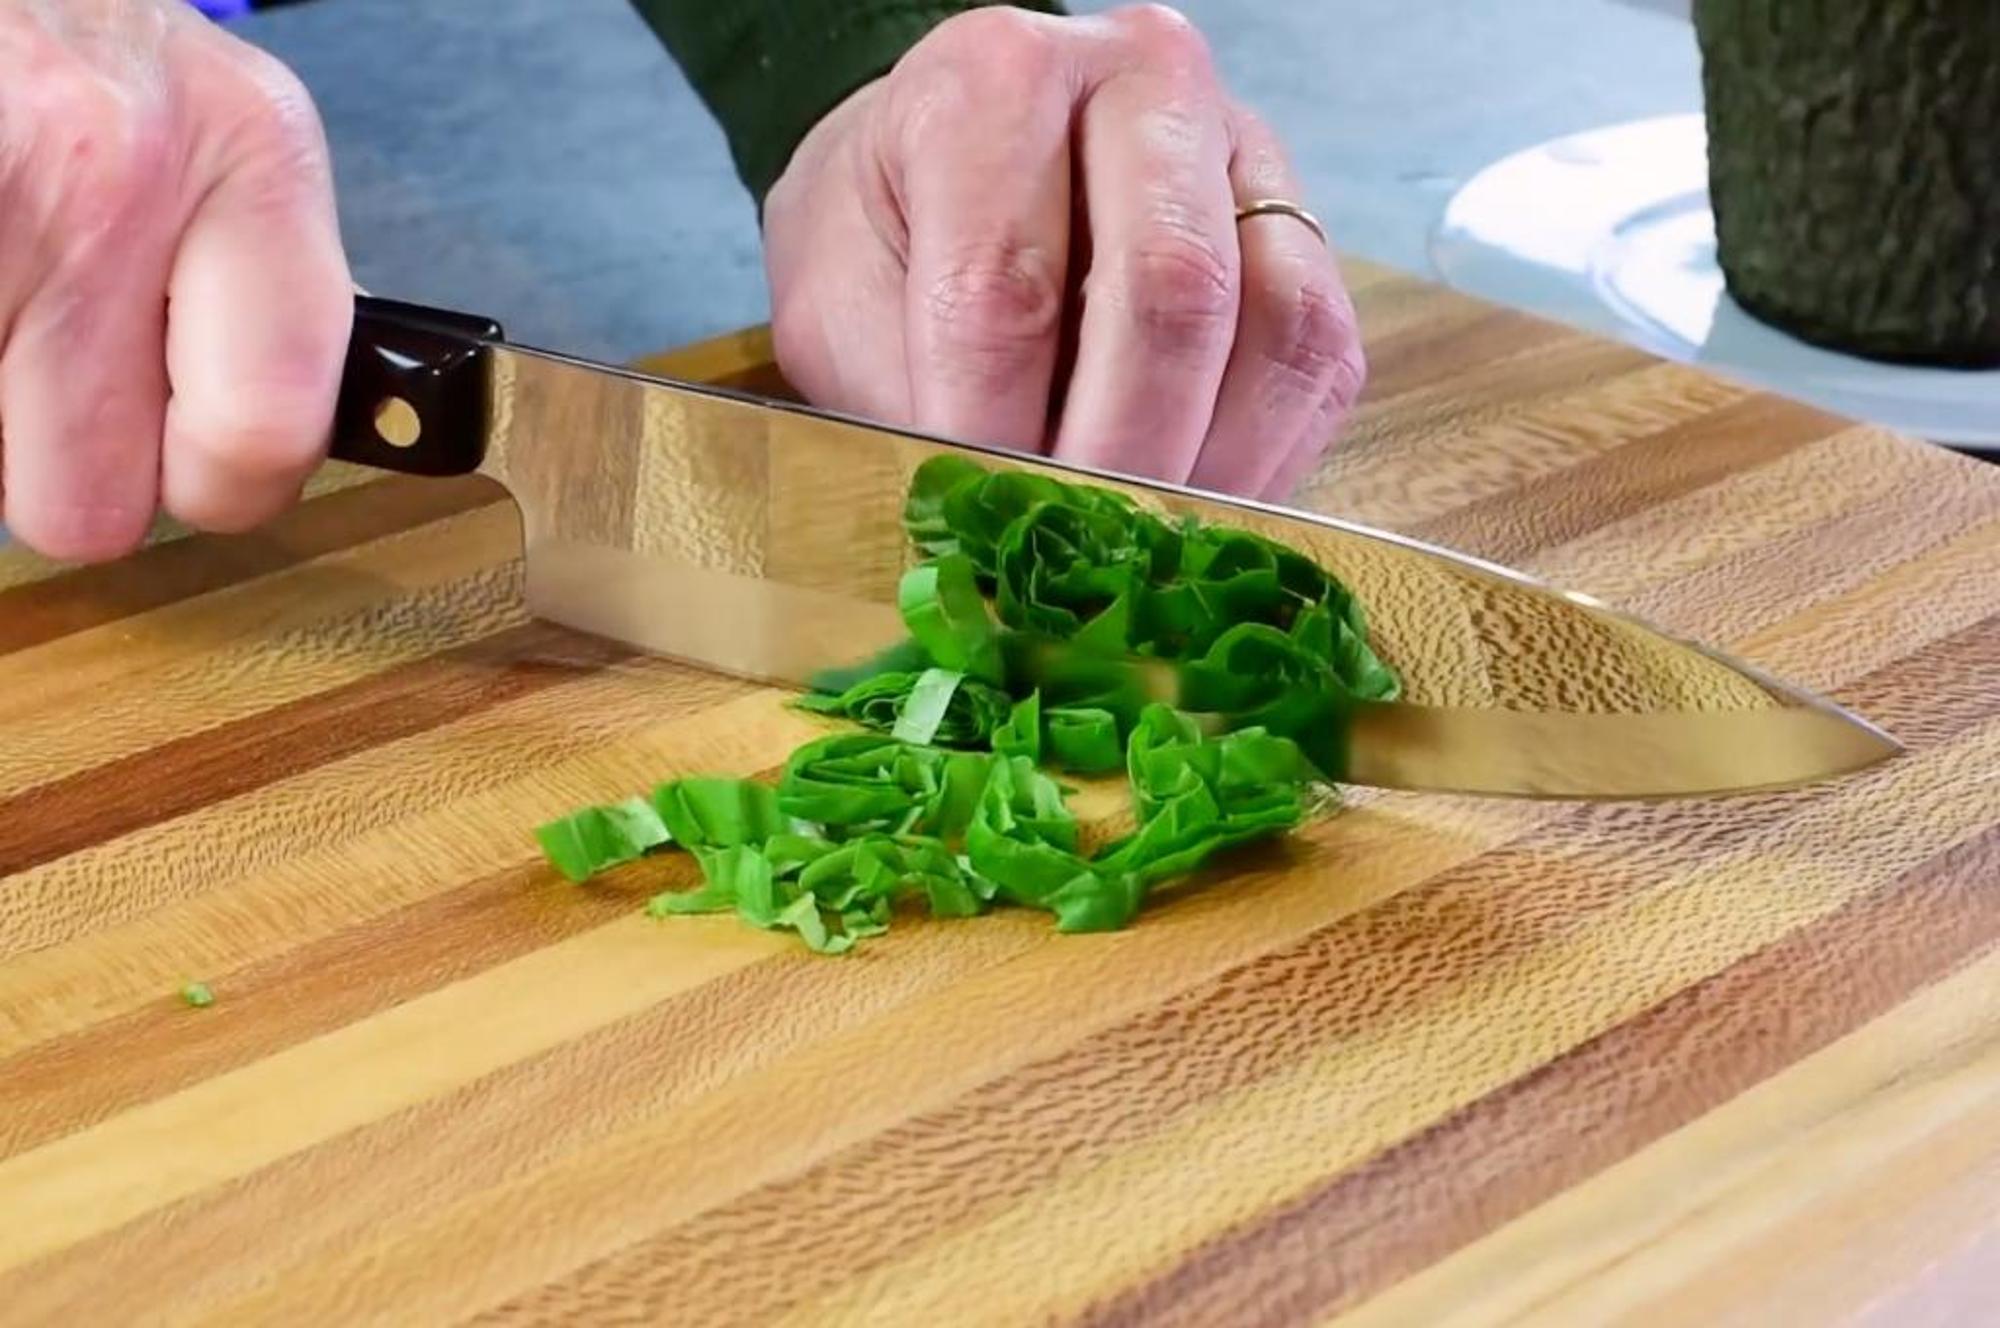 The Petite Chef being used to chop the basil.